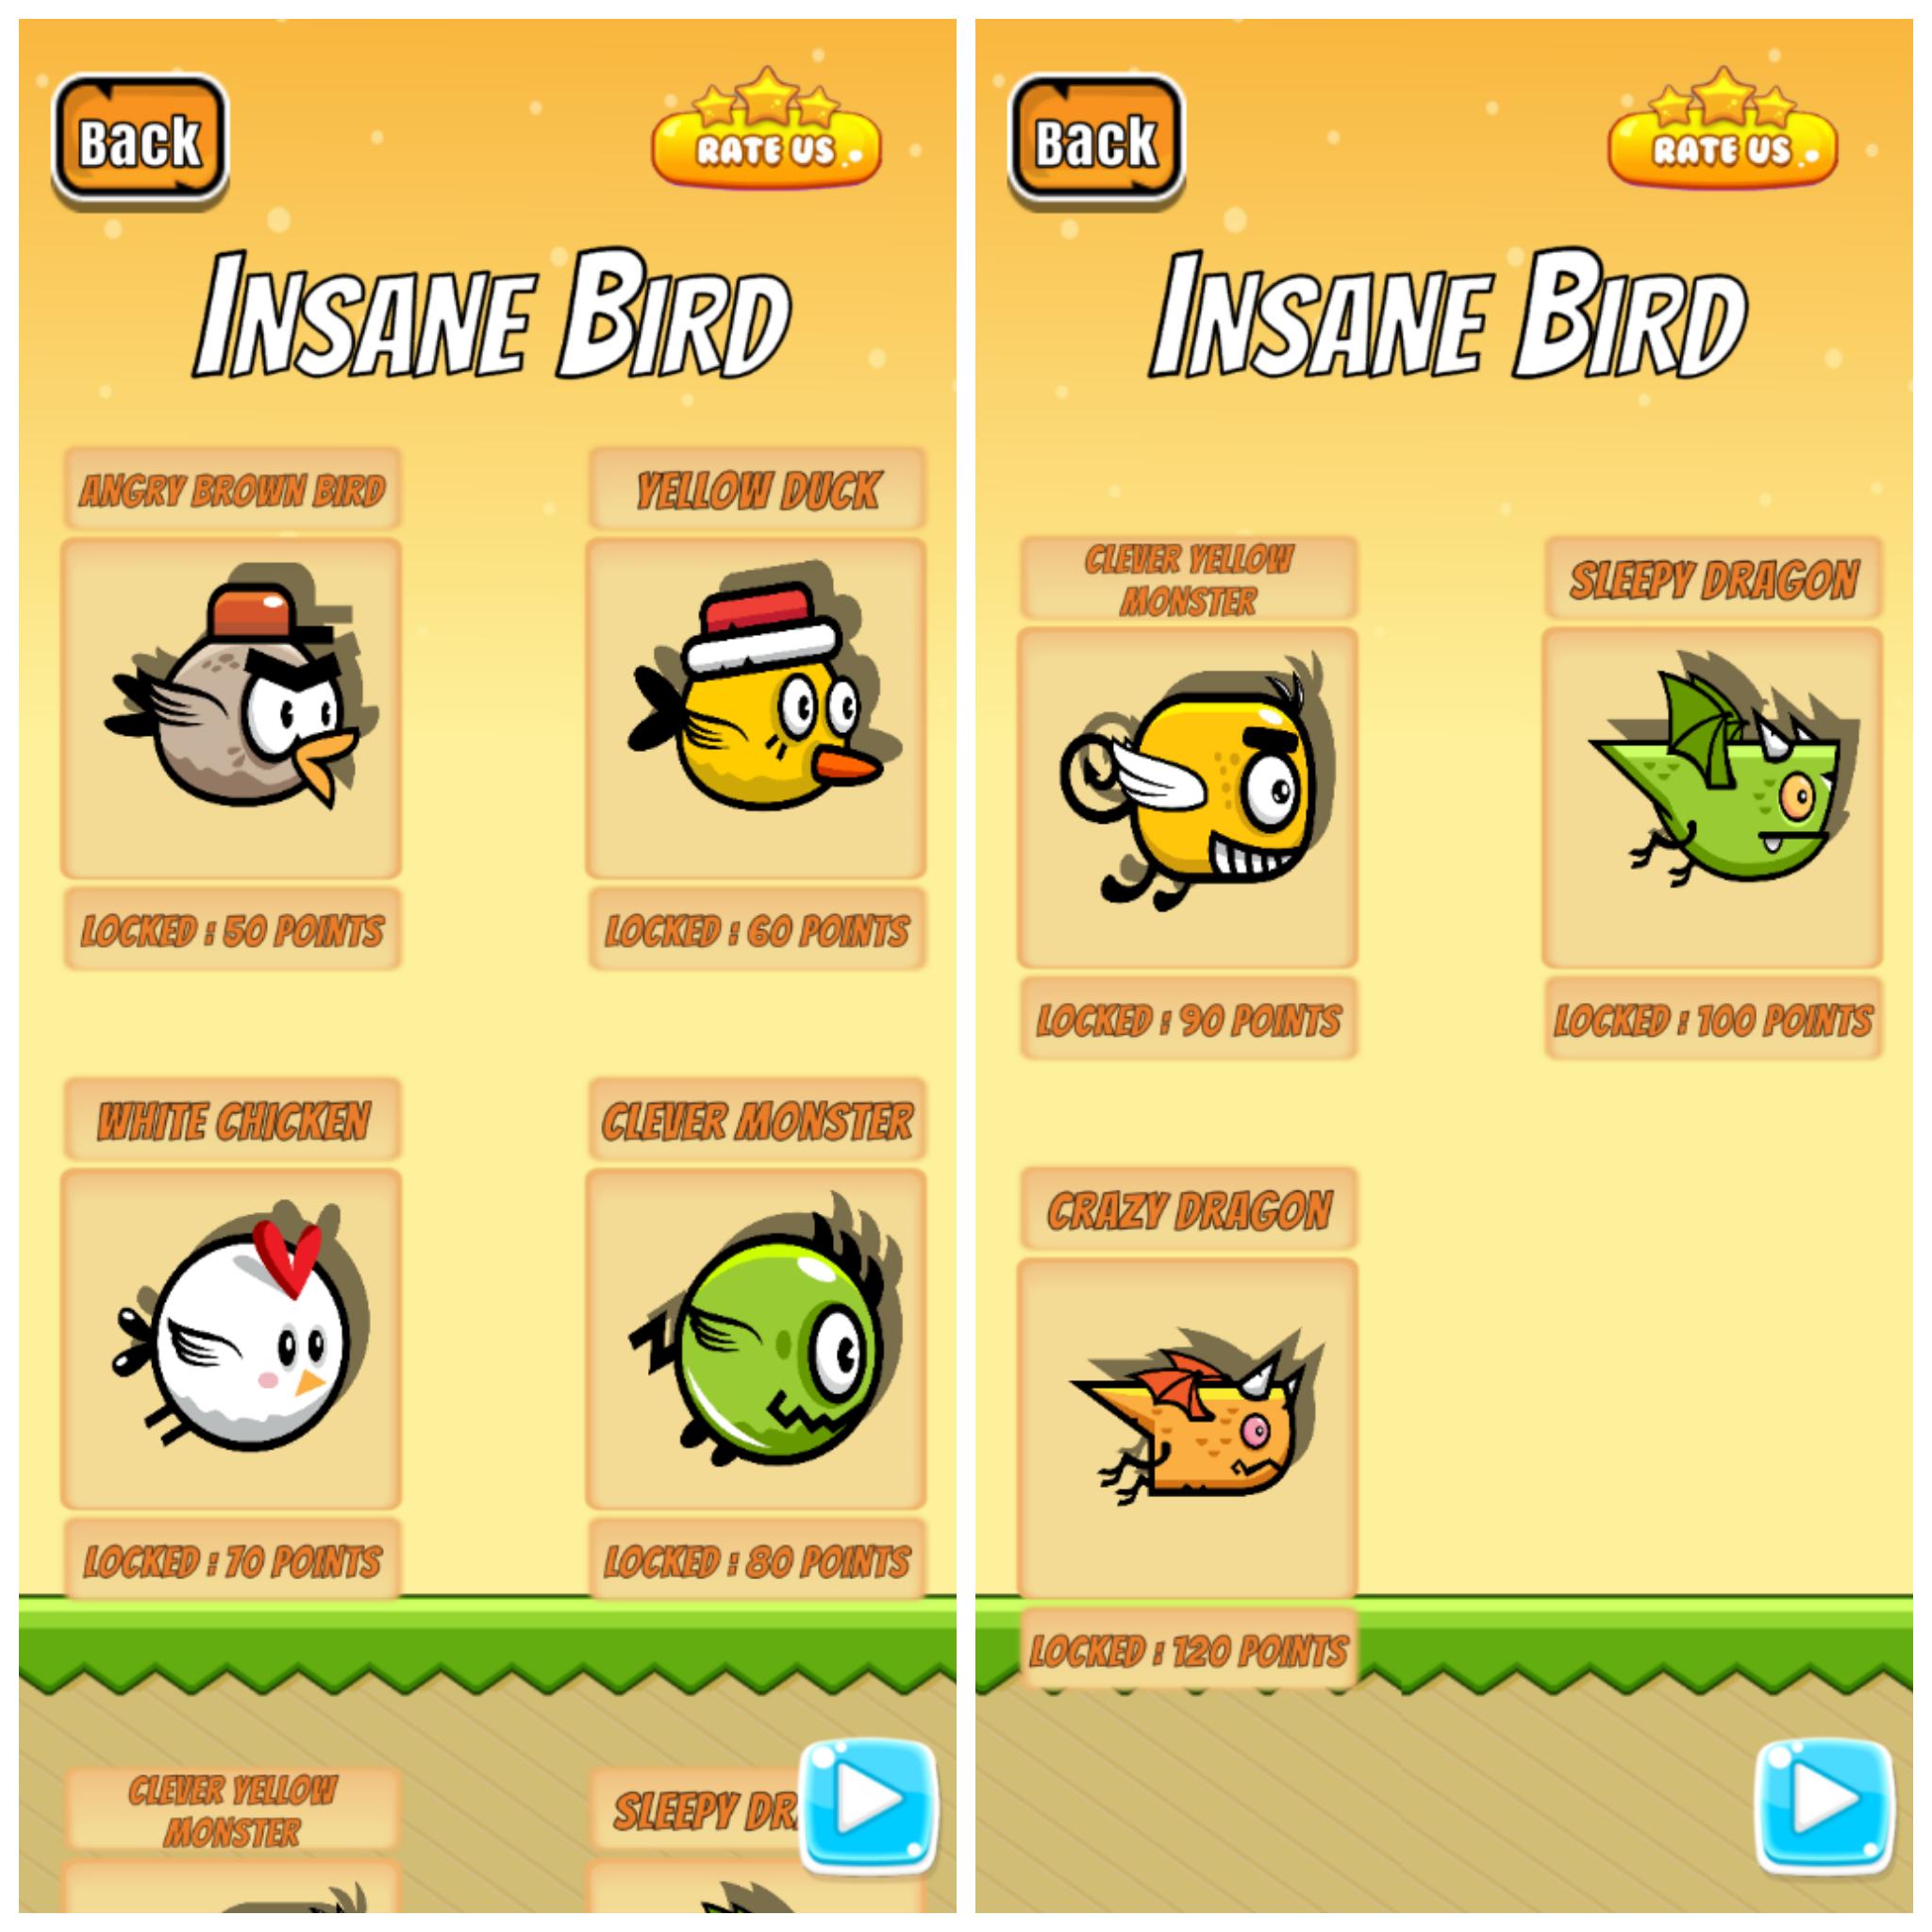 Angry Birds dev releases its take on Flappy Bird, with IAP